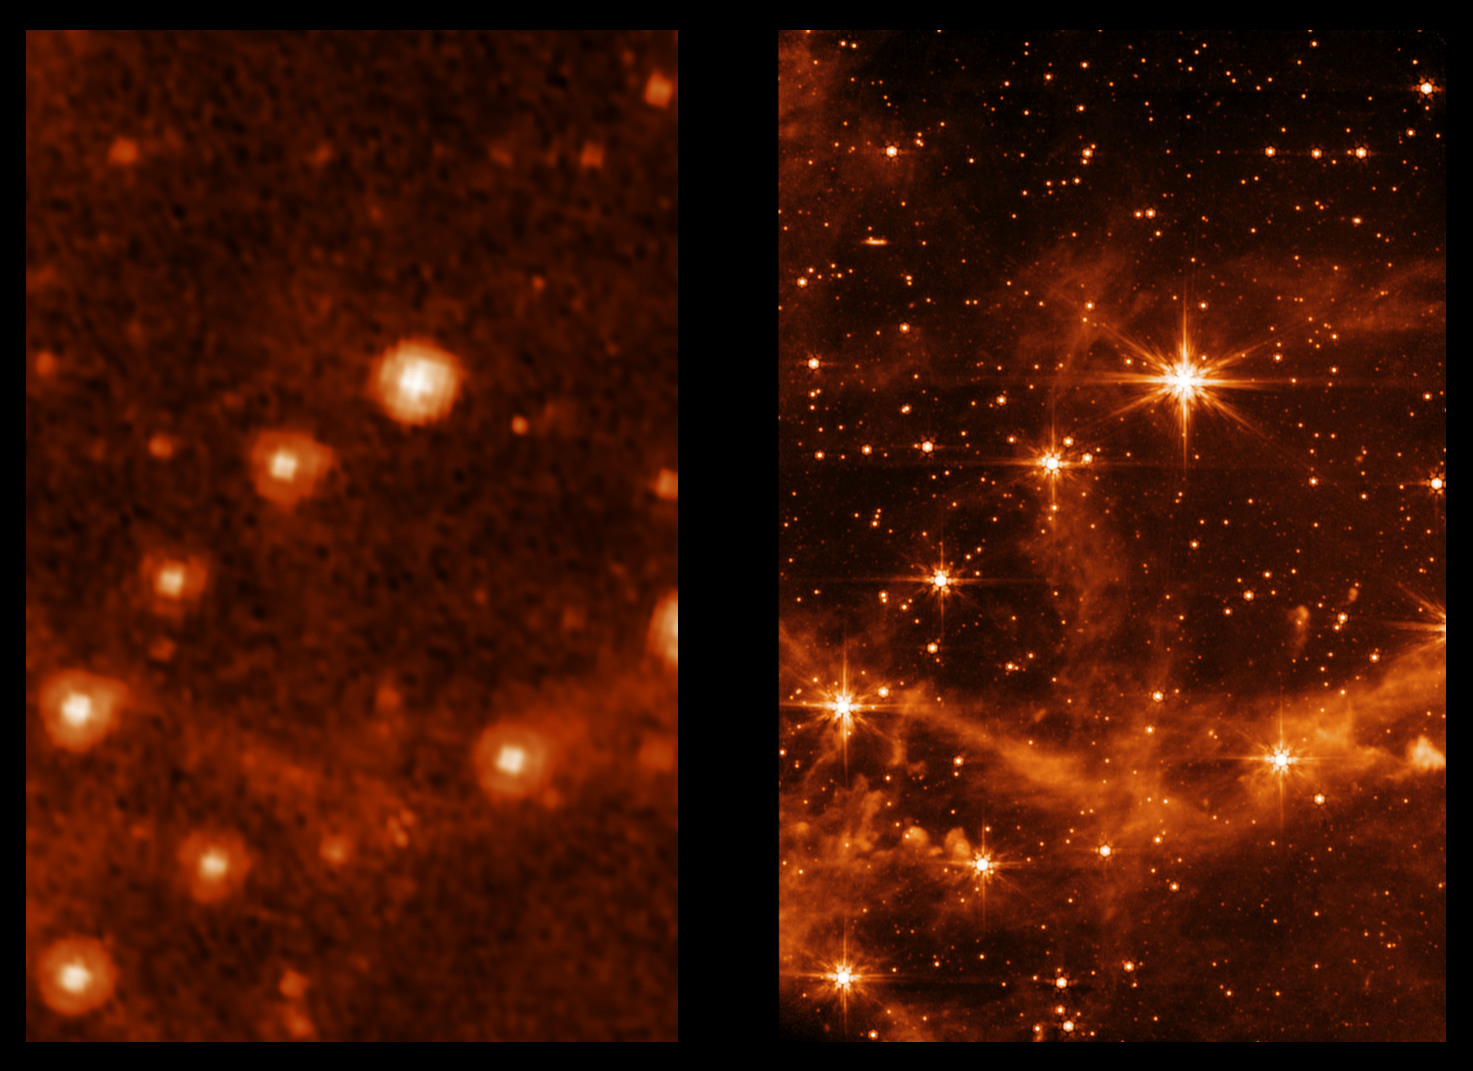 Spitzer, left, compared to Webb